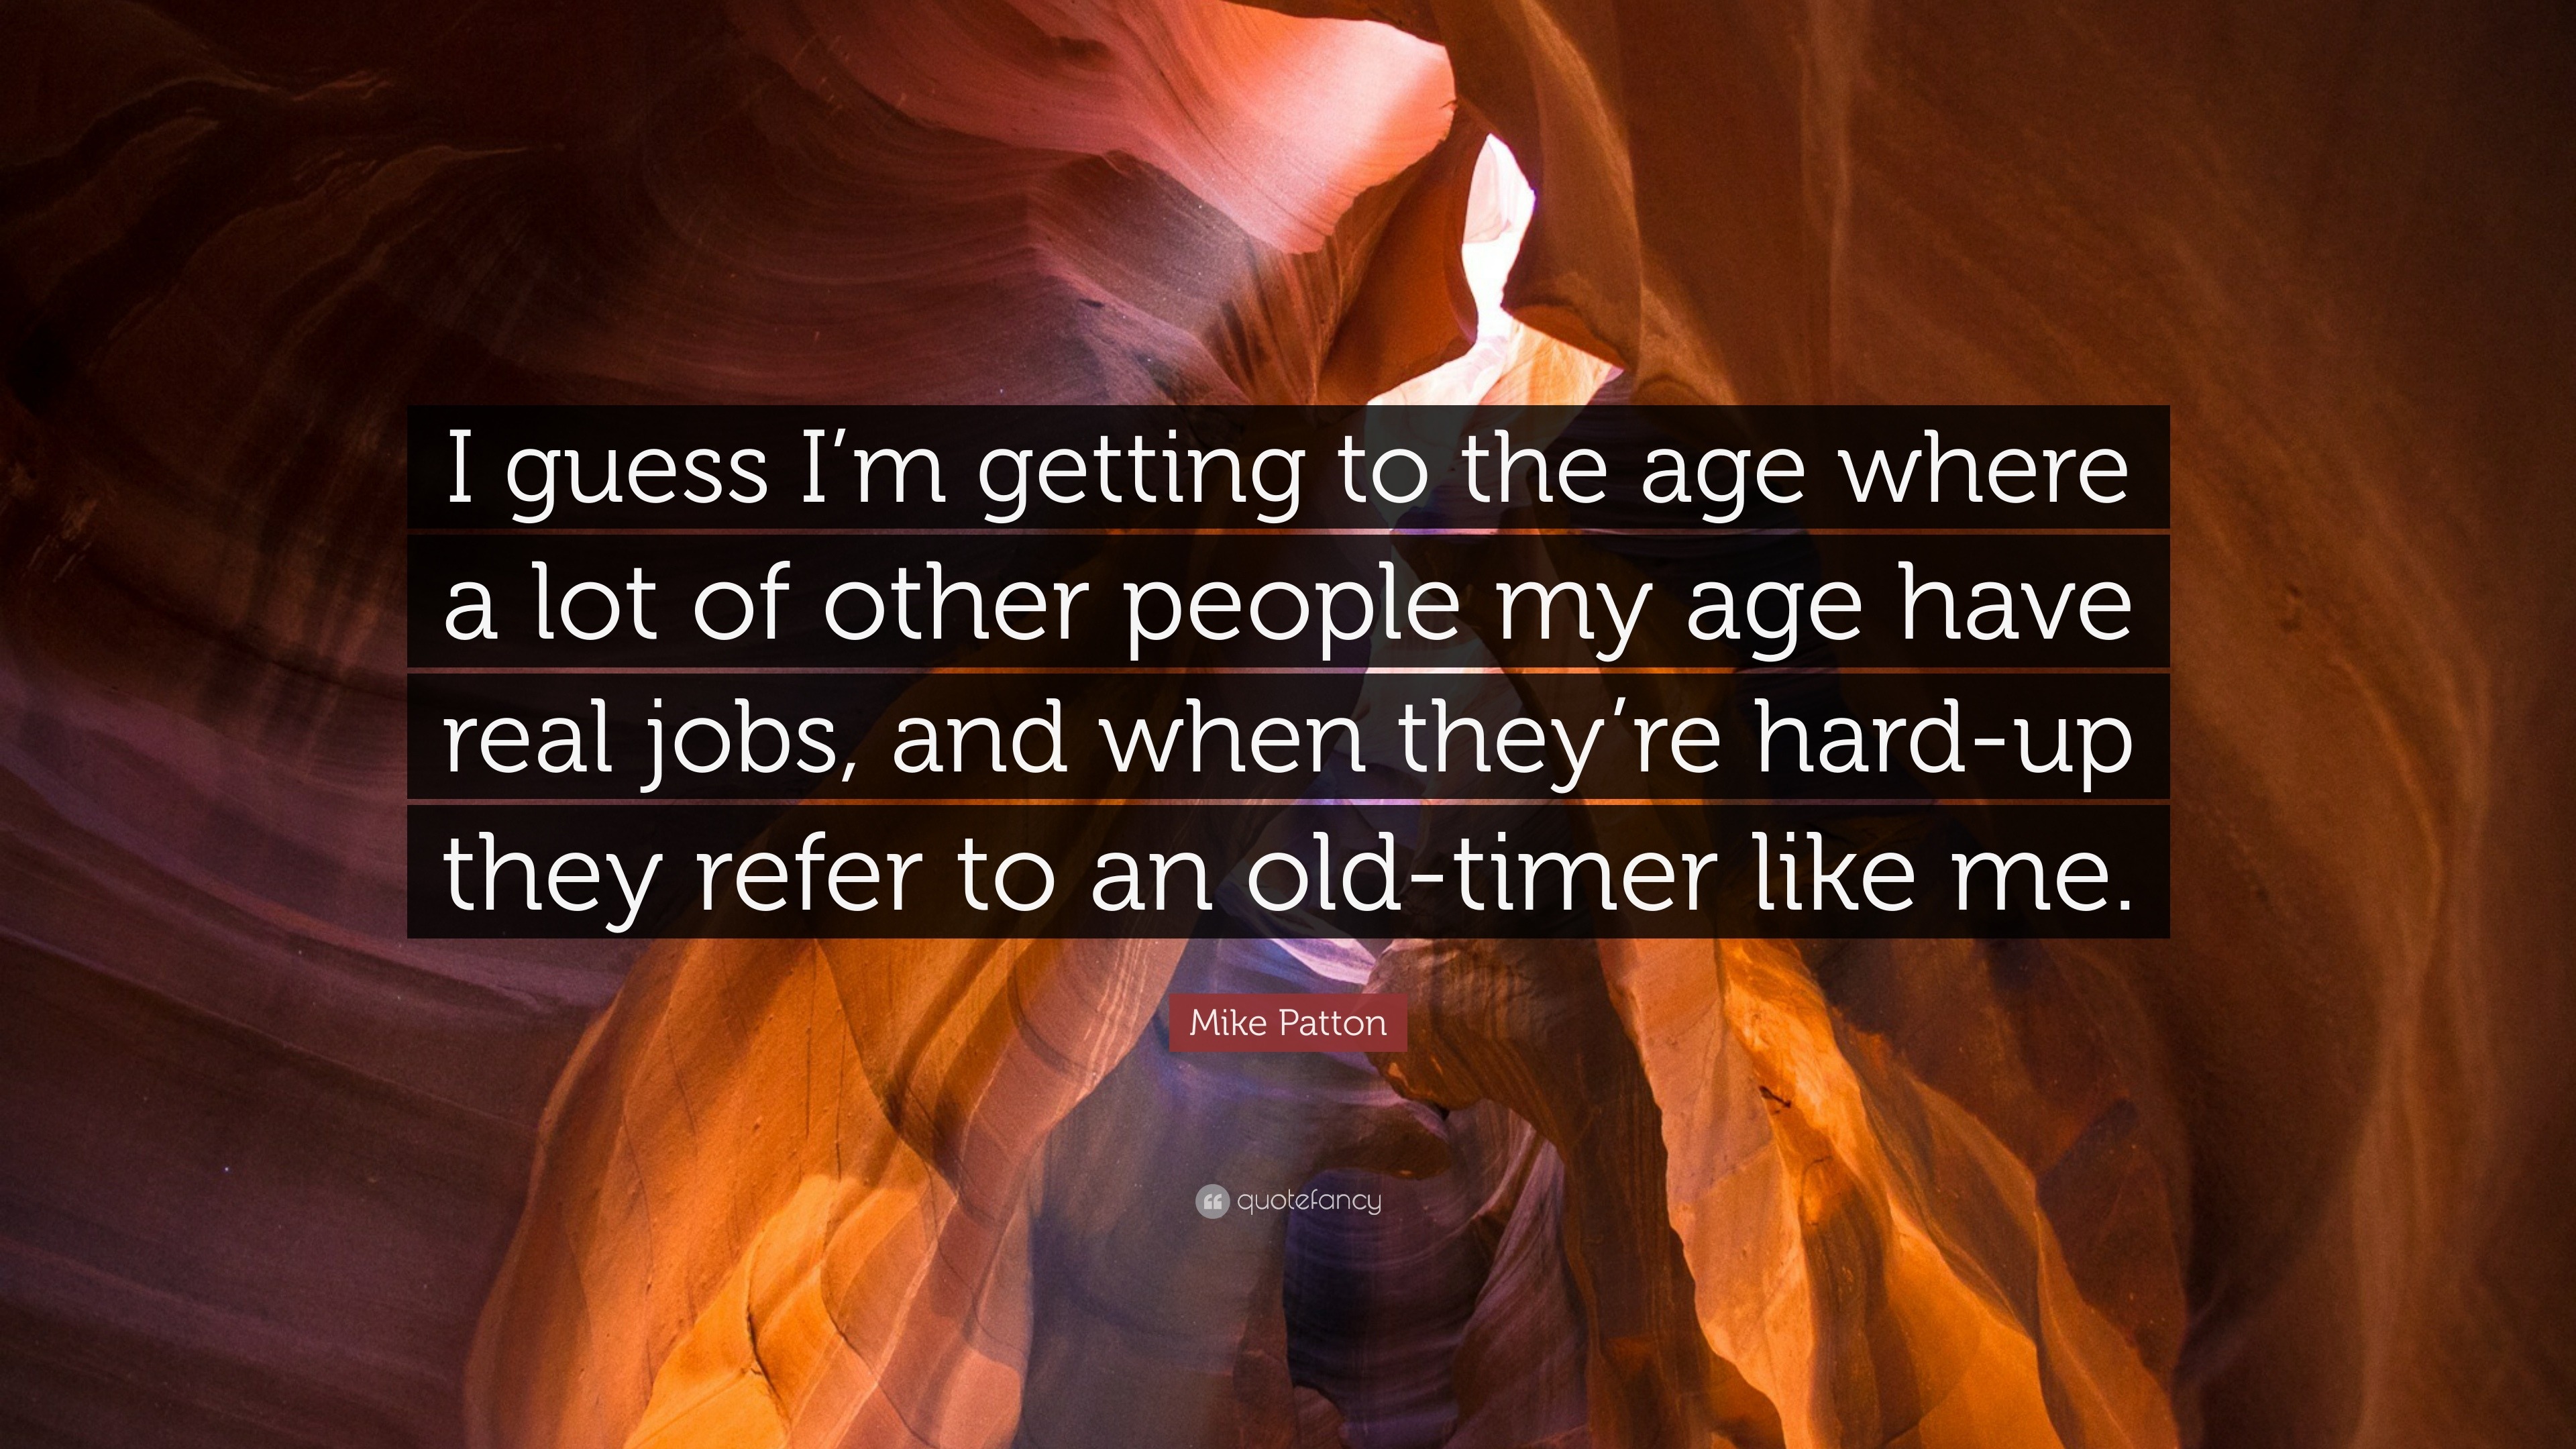 Mike Patton Quote: “I guess I'm getting to the age where a lot of other people my age have real jobs, and when they refer to...”